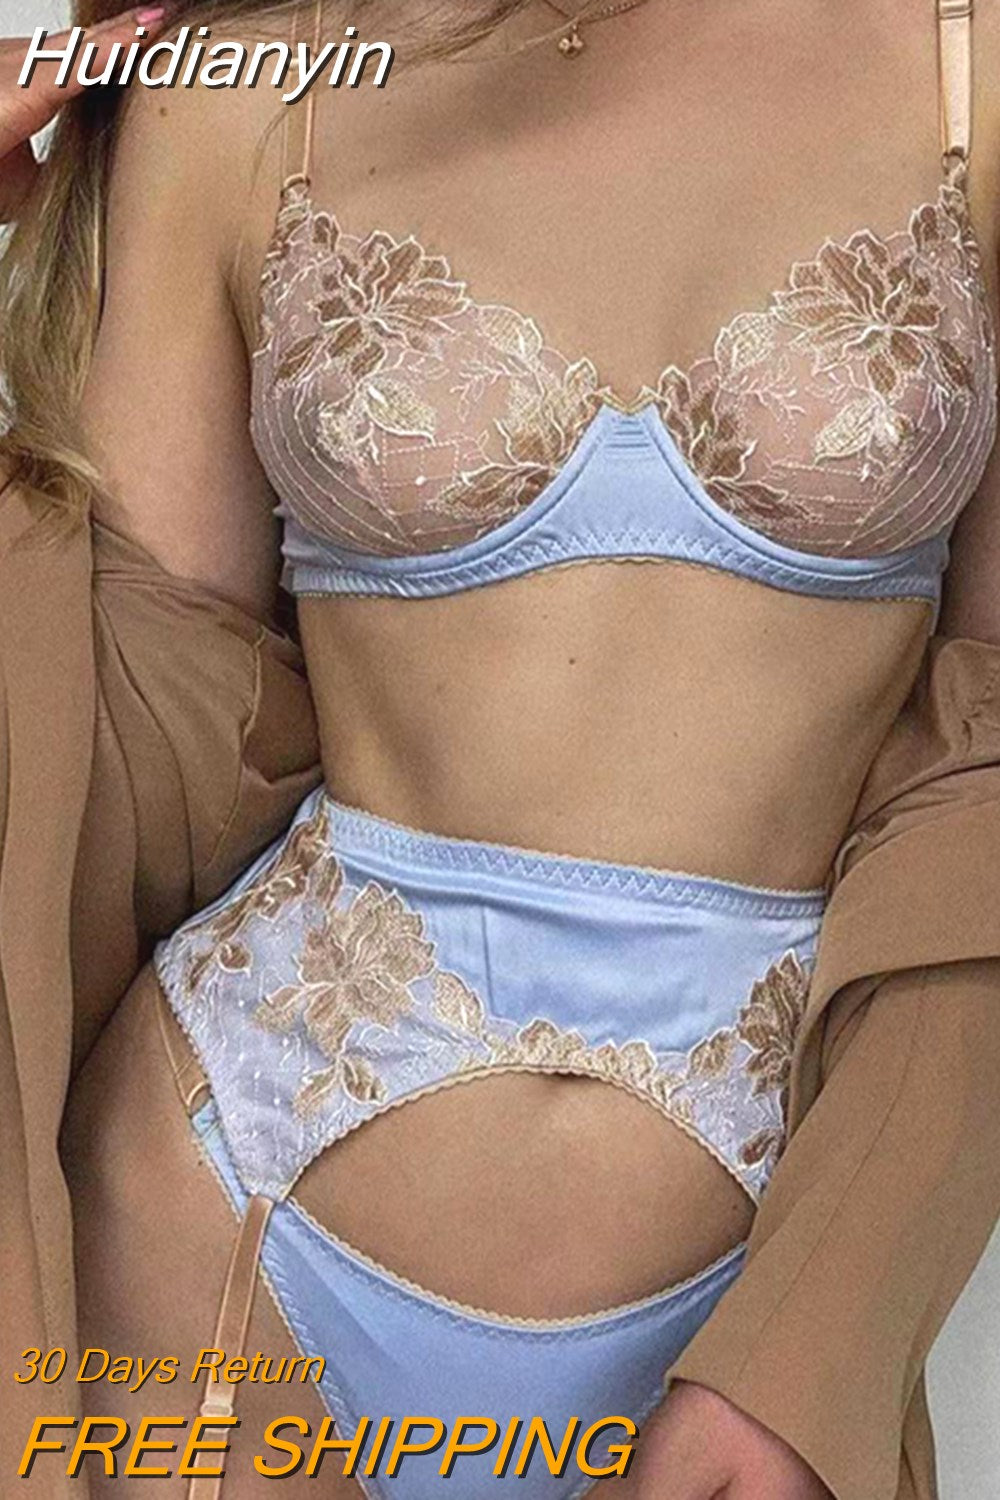 Huidianyin Sexy Lingerie Lace Embroidery Erotic Underwear Set Underwire Push Up Bra Brief Sets with Garters Fancy Sensual Outfit